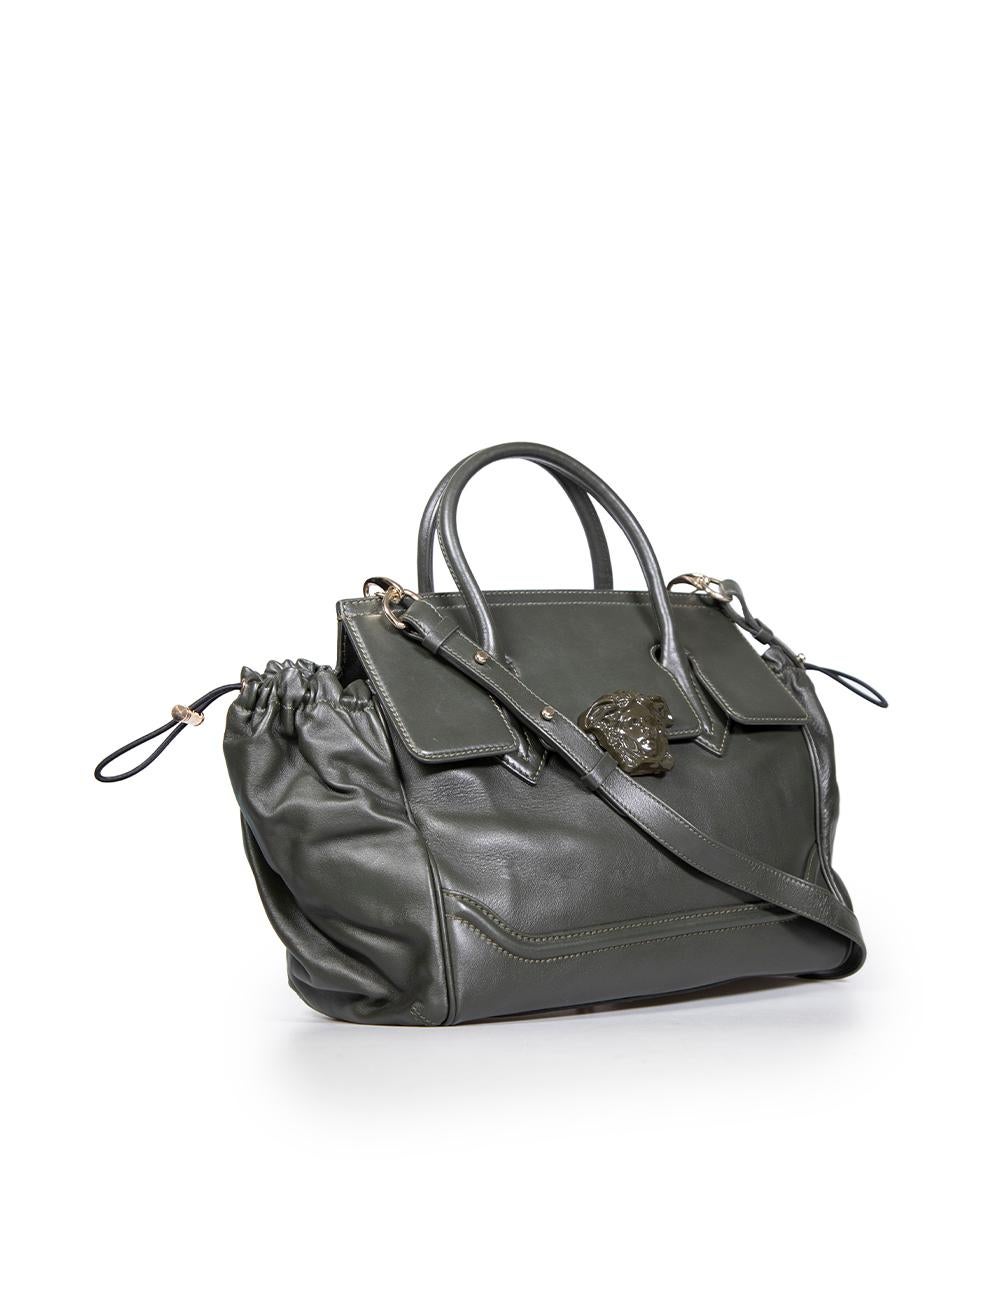 CONDITION is Very good. Minimal wear to bag is evident. Minimal wear to the front, back and base with indents and scratches to the leather. The rear-left base foot is also missing on this used Versace designer resale item.
 
 
 
 Details
 
 
 Large